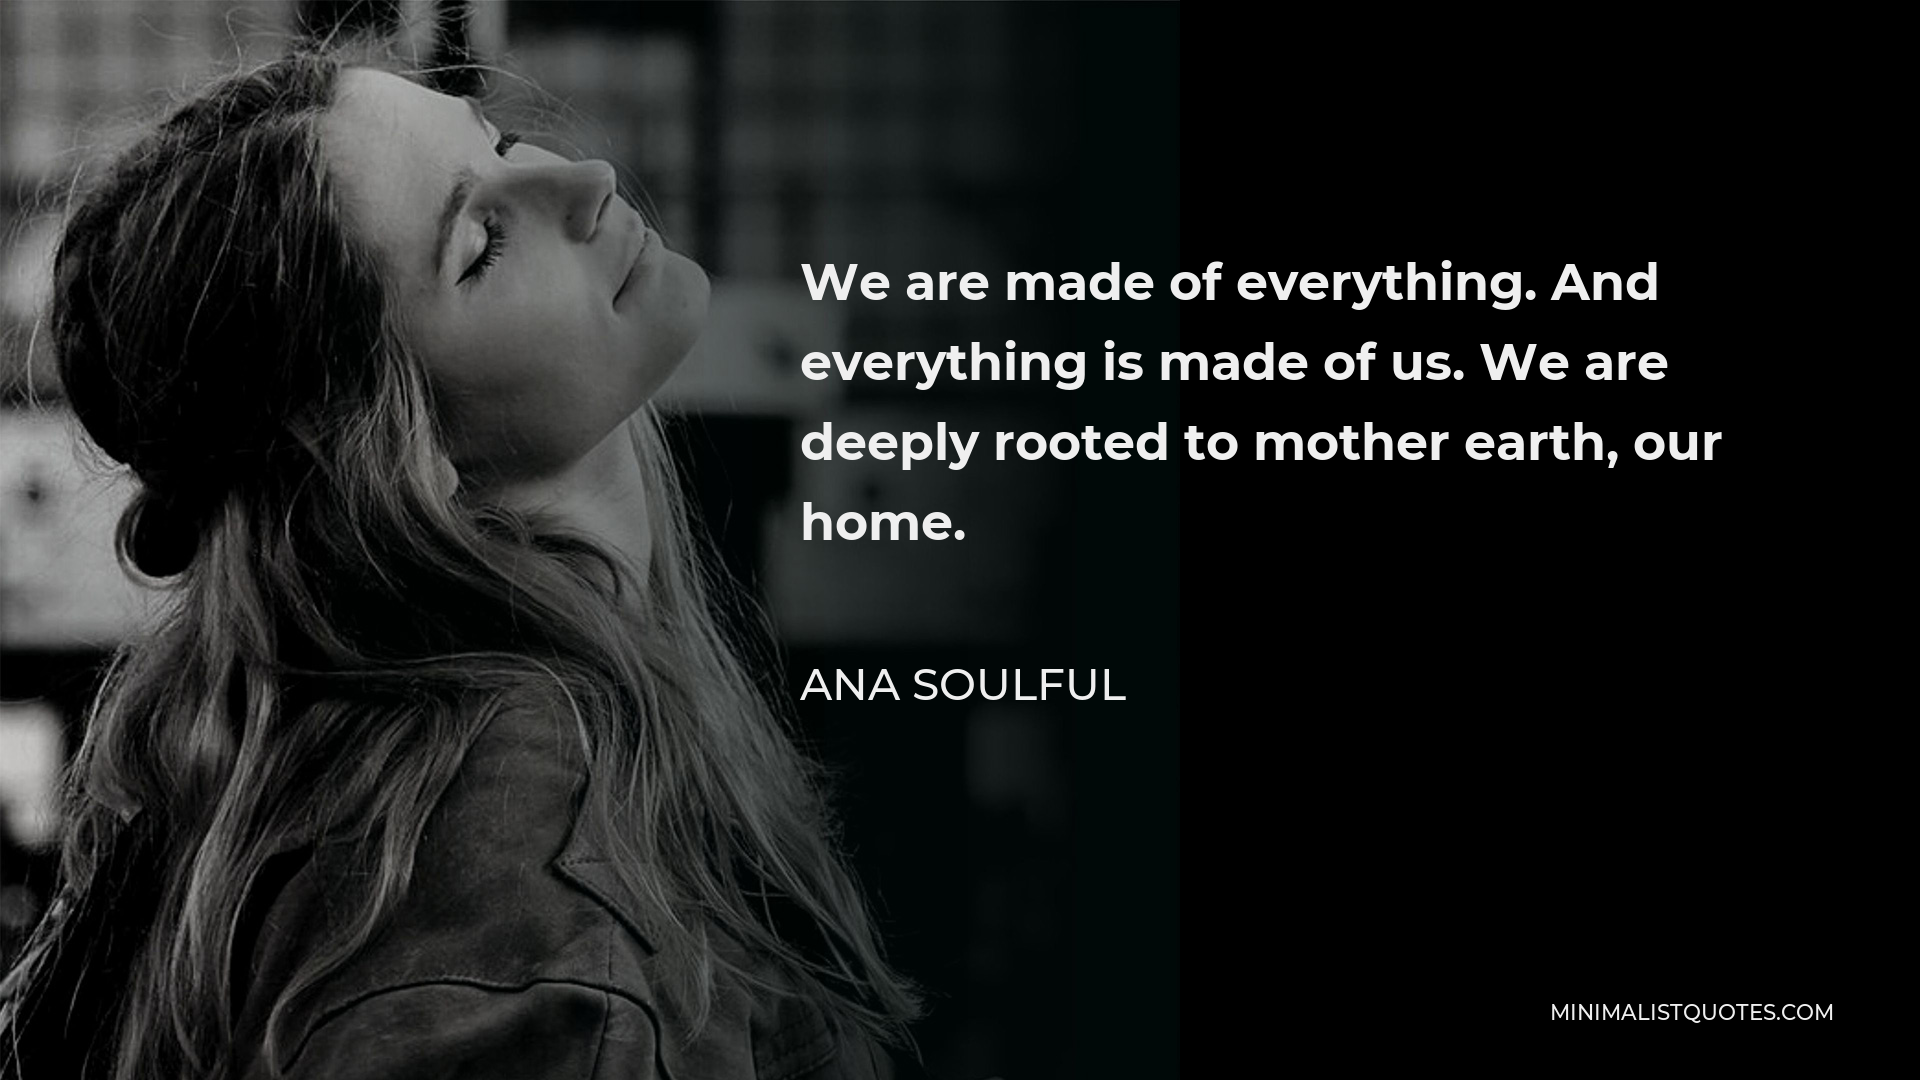 Ana Soulful Quote - We are made of everything. And everything is made of us. We are deeply rooted to mother earth, our home.